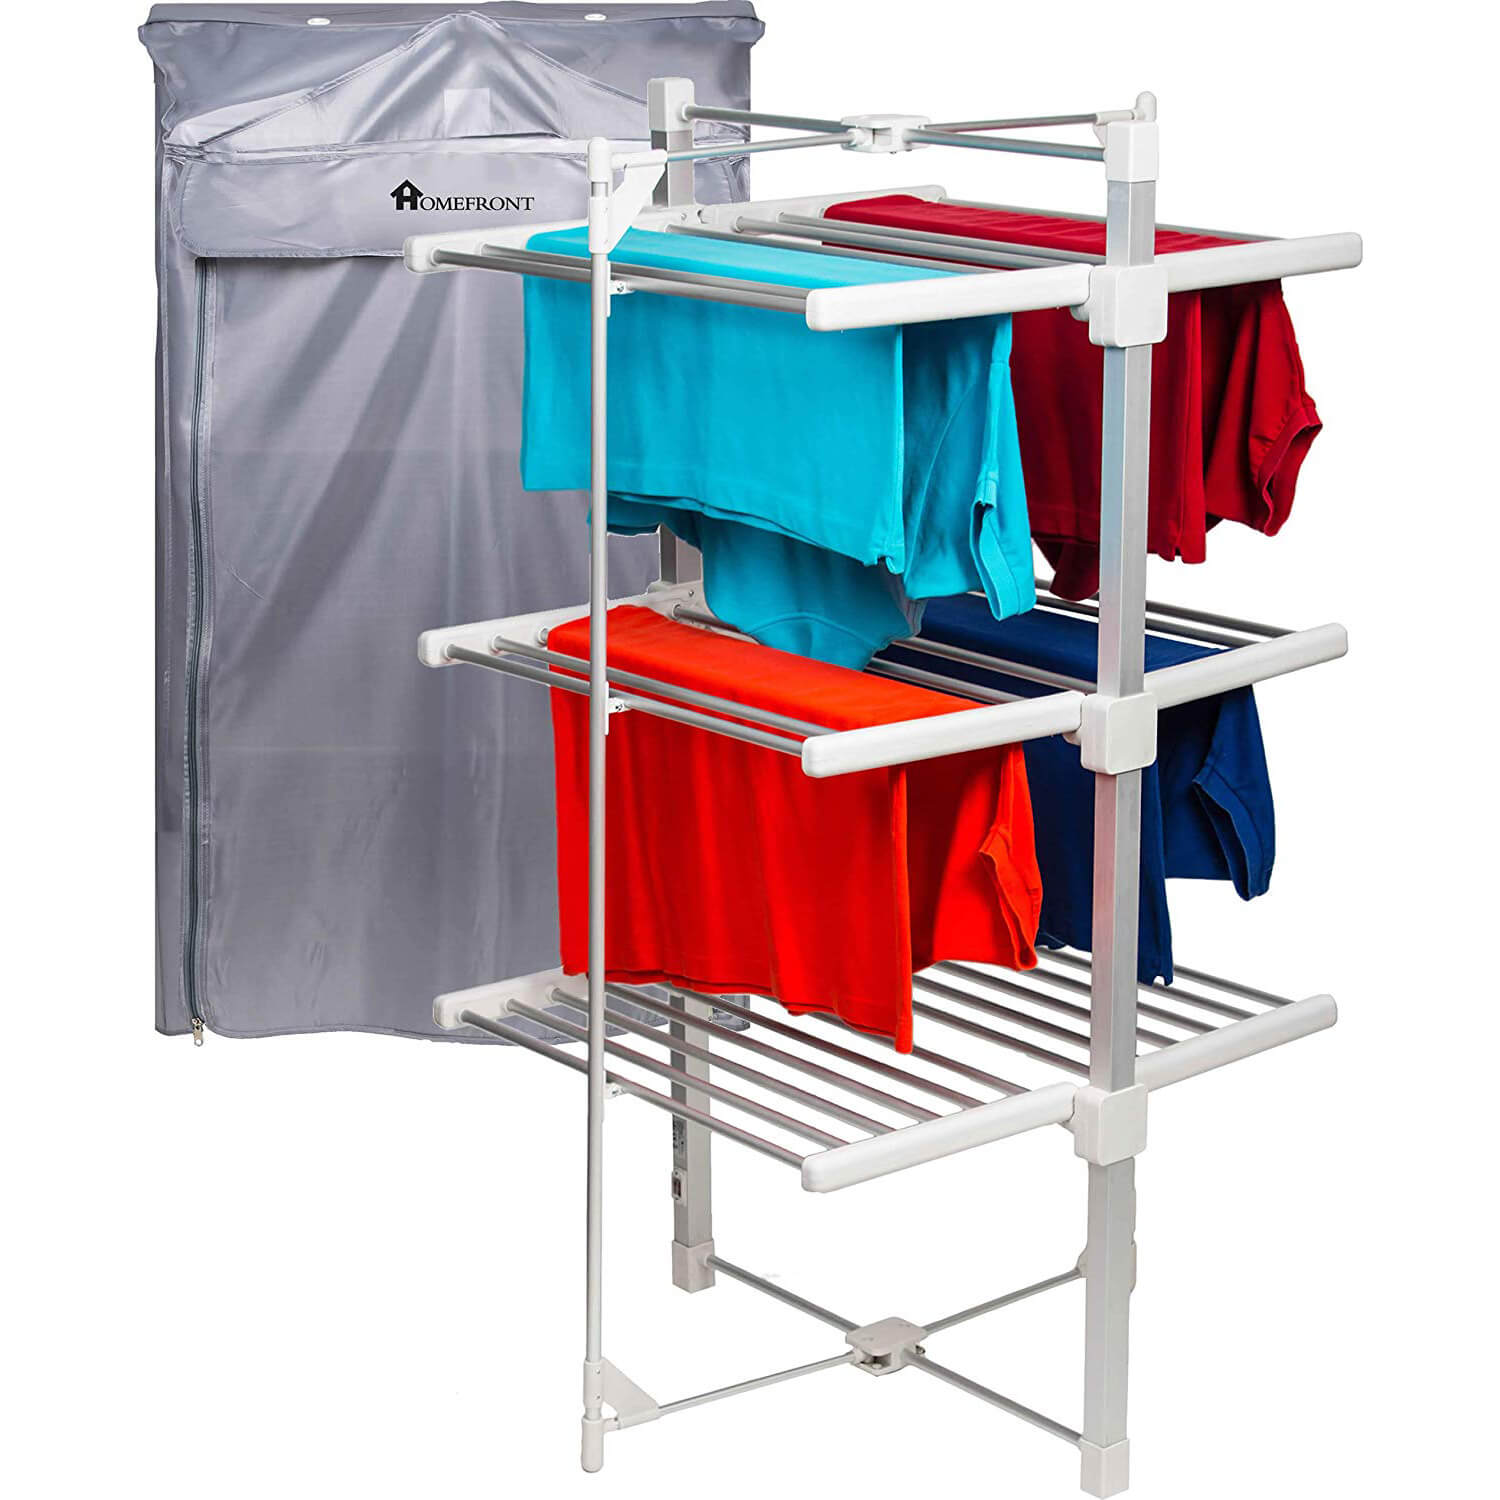 Portable Heated Electric Clothes Dryer 2 Tier Aluminum 3 Tier Folding Laundry 